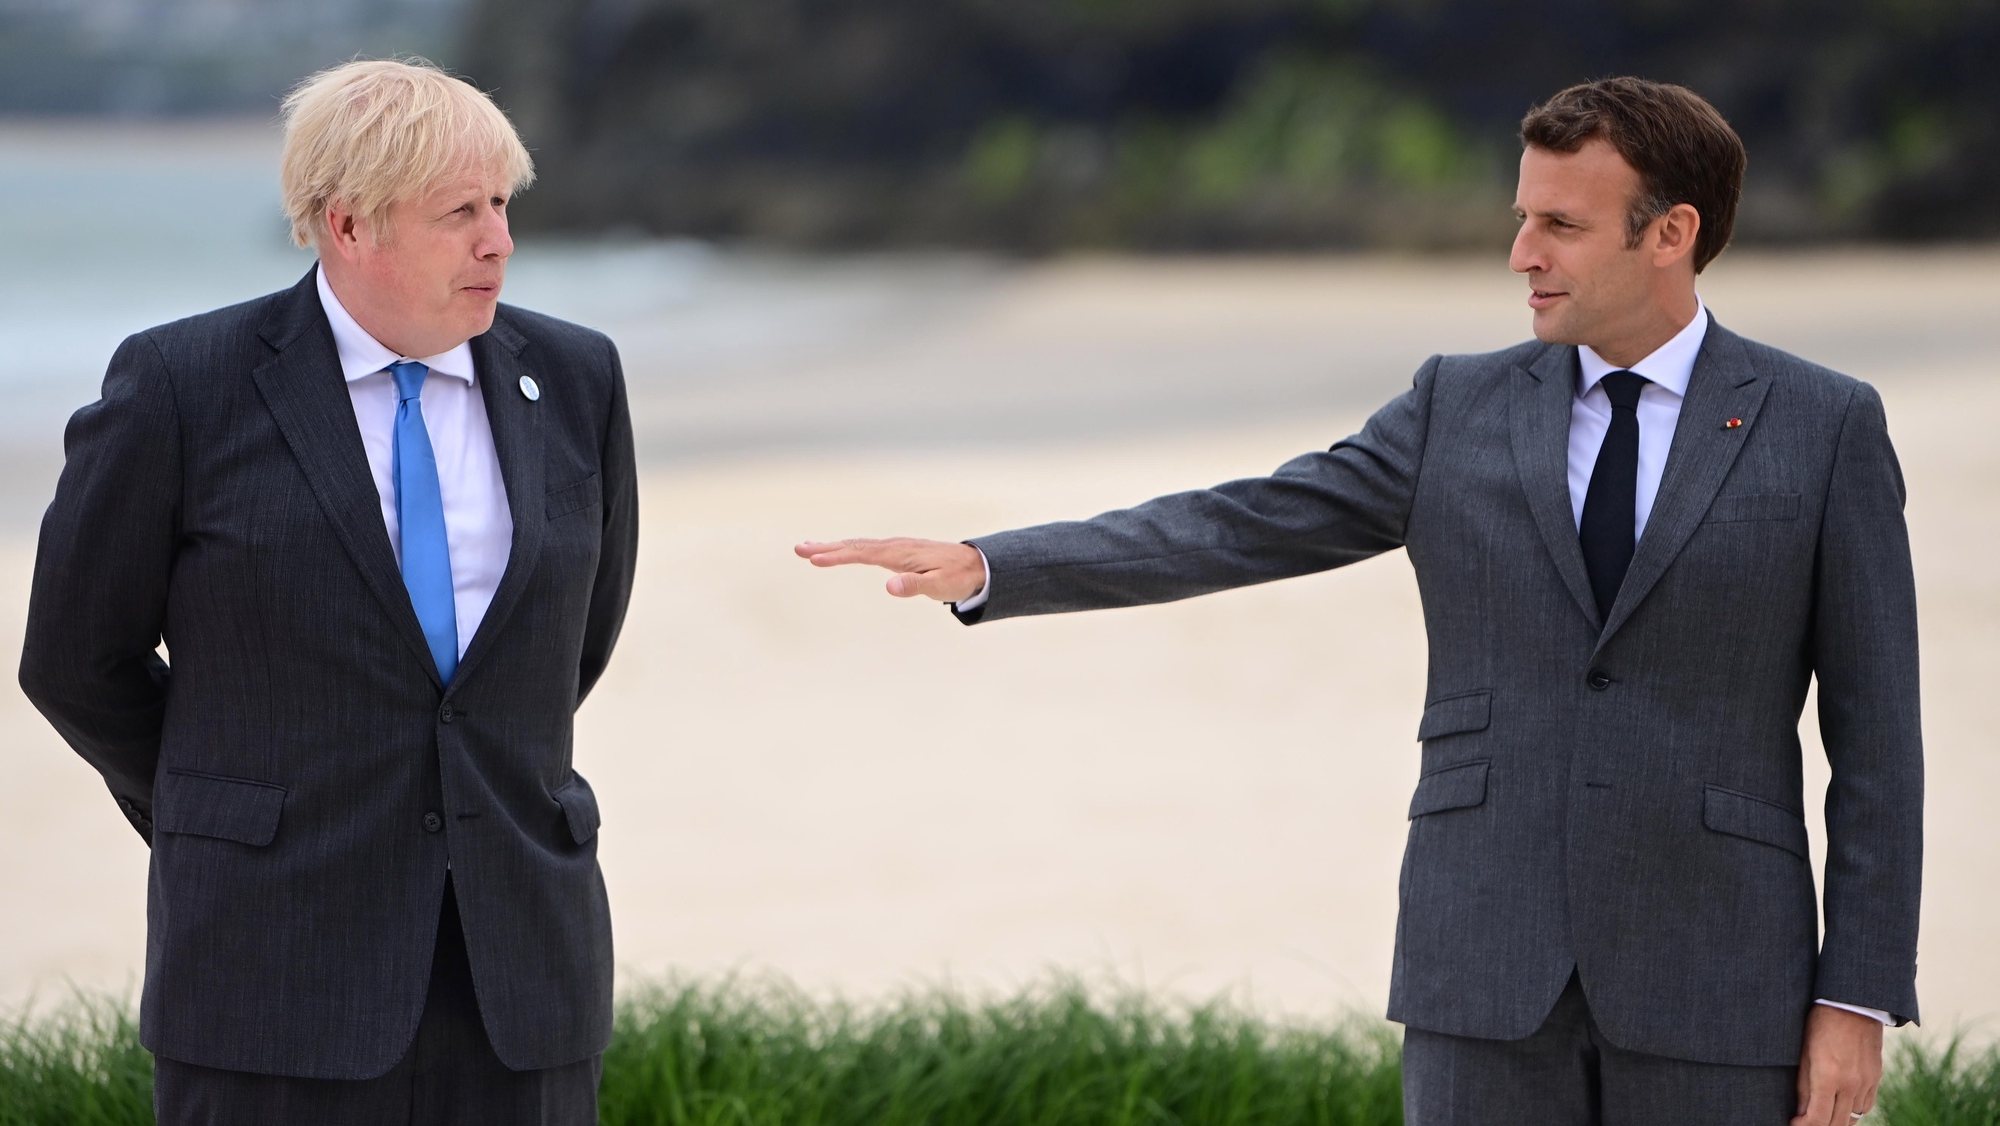 epa09262505 France&#039;s President Emmanuel Macron (R) greets Britain&#039;s Prime Minister Boris Johnson (L) at the official leaders welcome during the G7 Summit in Carbis Bay, Britain, 11 June 2021. Britain hosts the Group of Seven (G7) summit in Cornwall from 11 to 13 June 2021.  EPA/NEIL HALL/POOL